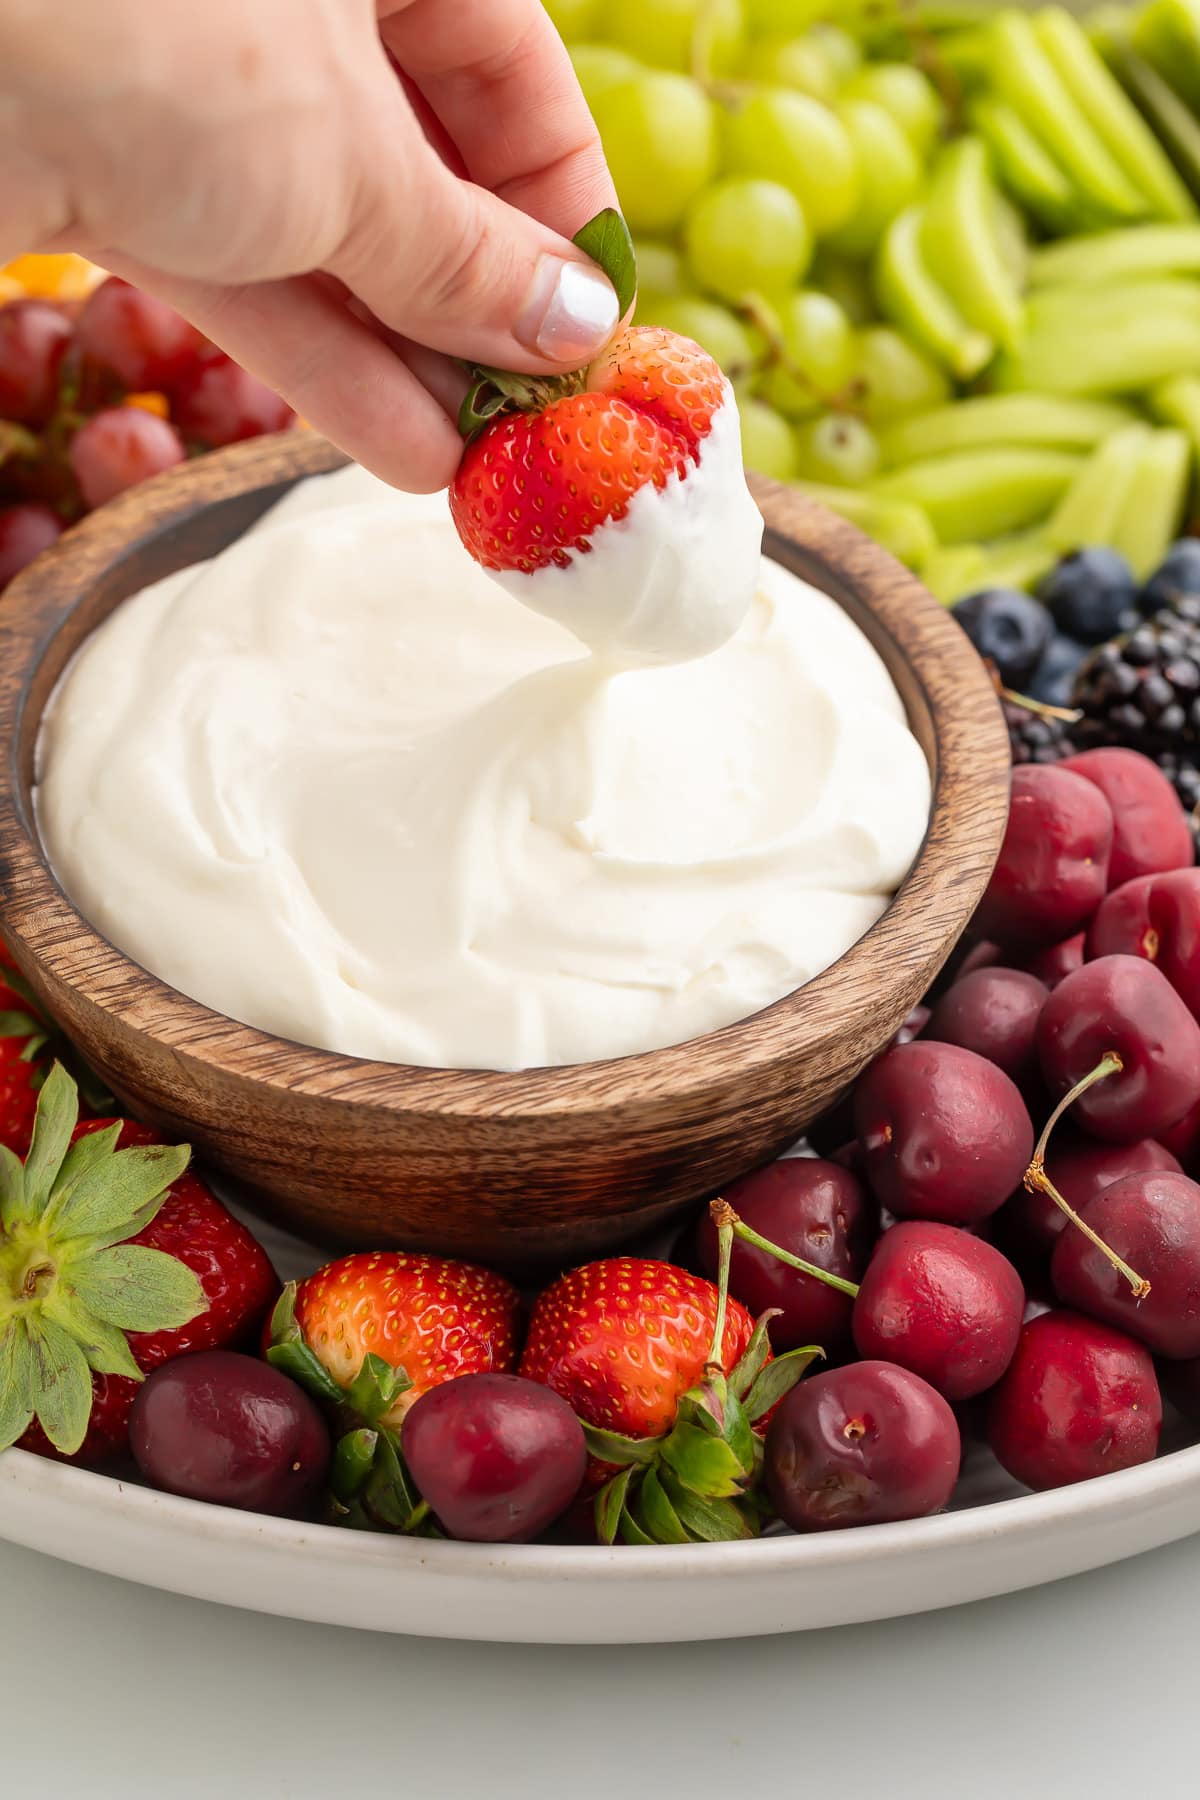 A white woman's hand holding a fresh strawberry as the woman dips it into a bowl of whipped cream cheese.